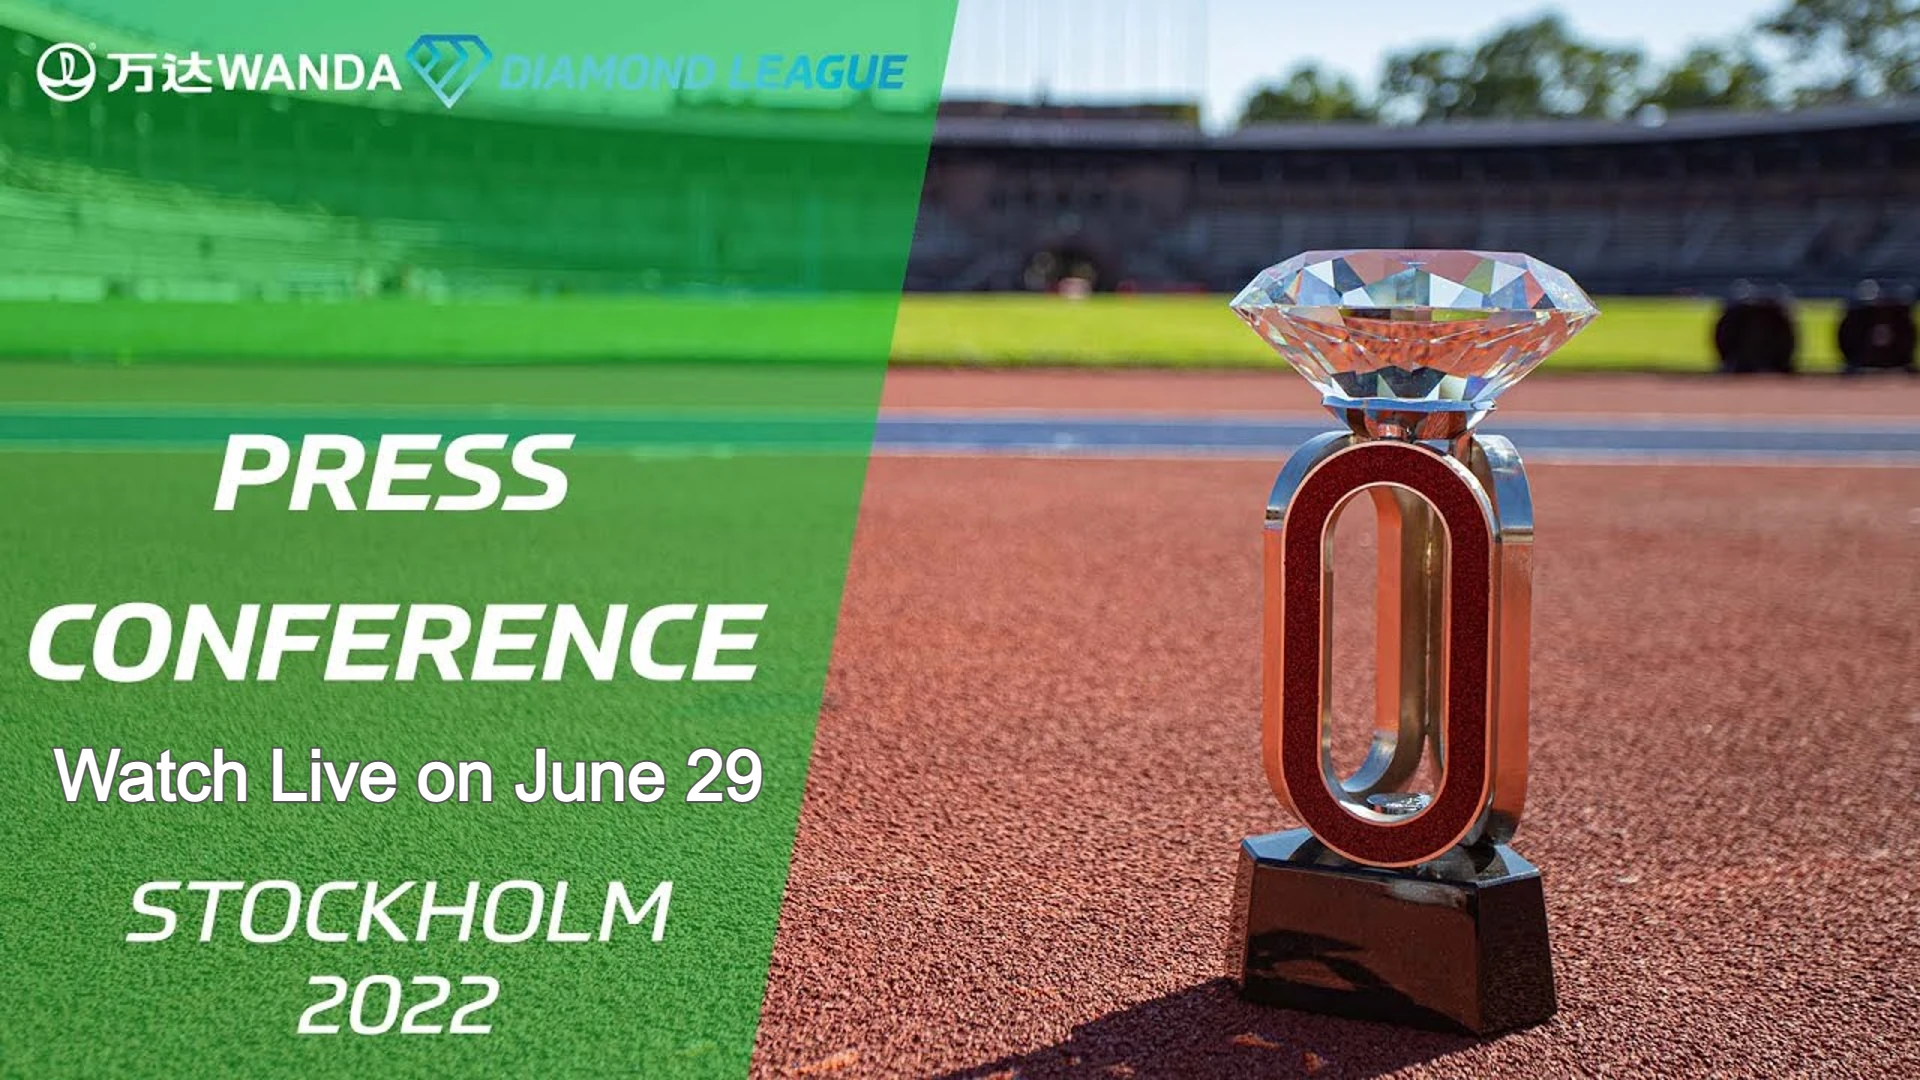 How to watch the press conference for the 2022 Stockholm Diamond League meeting?